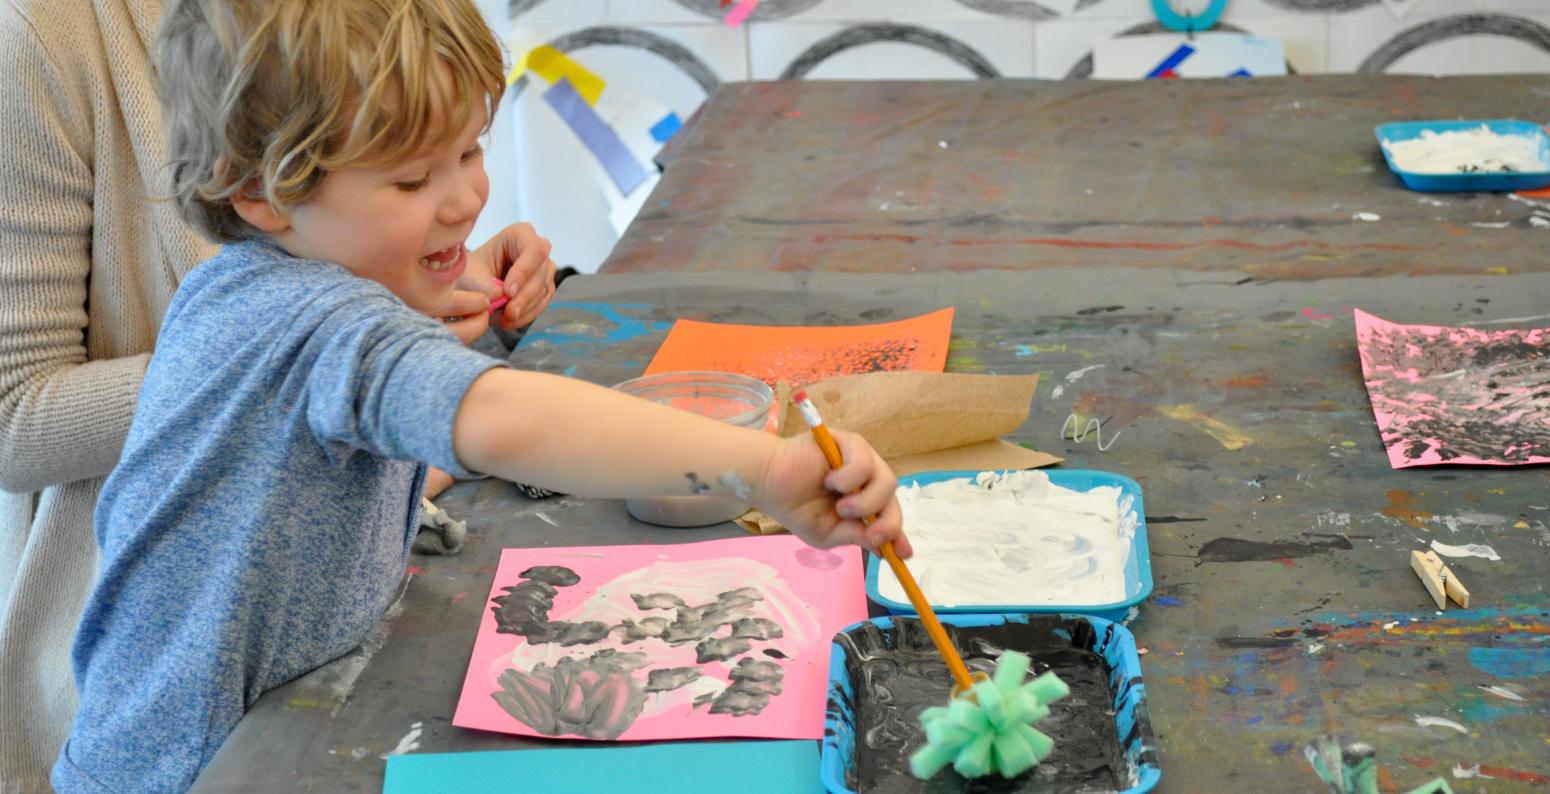 A young child enthusiastically painting with a textured paintbrush in black paint.